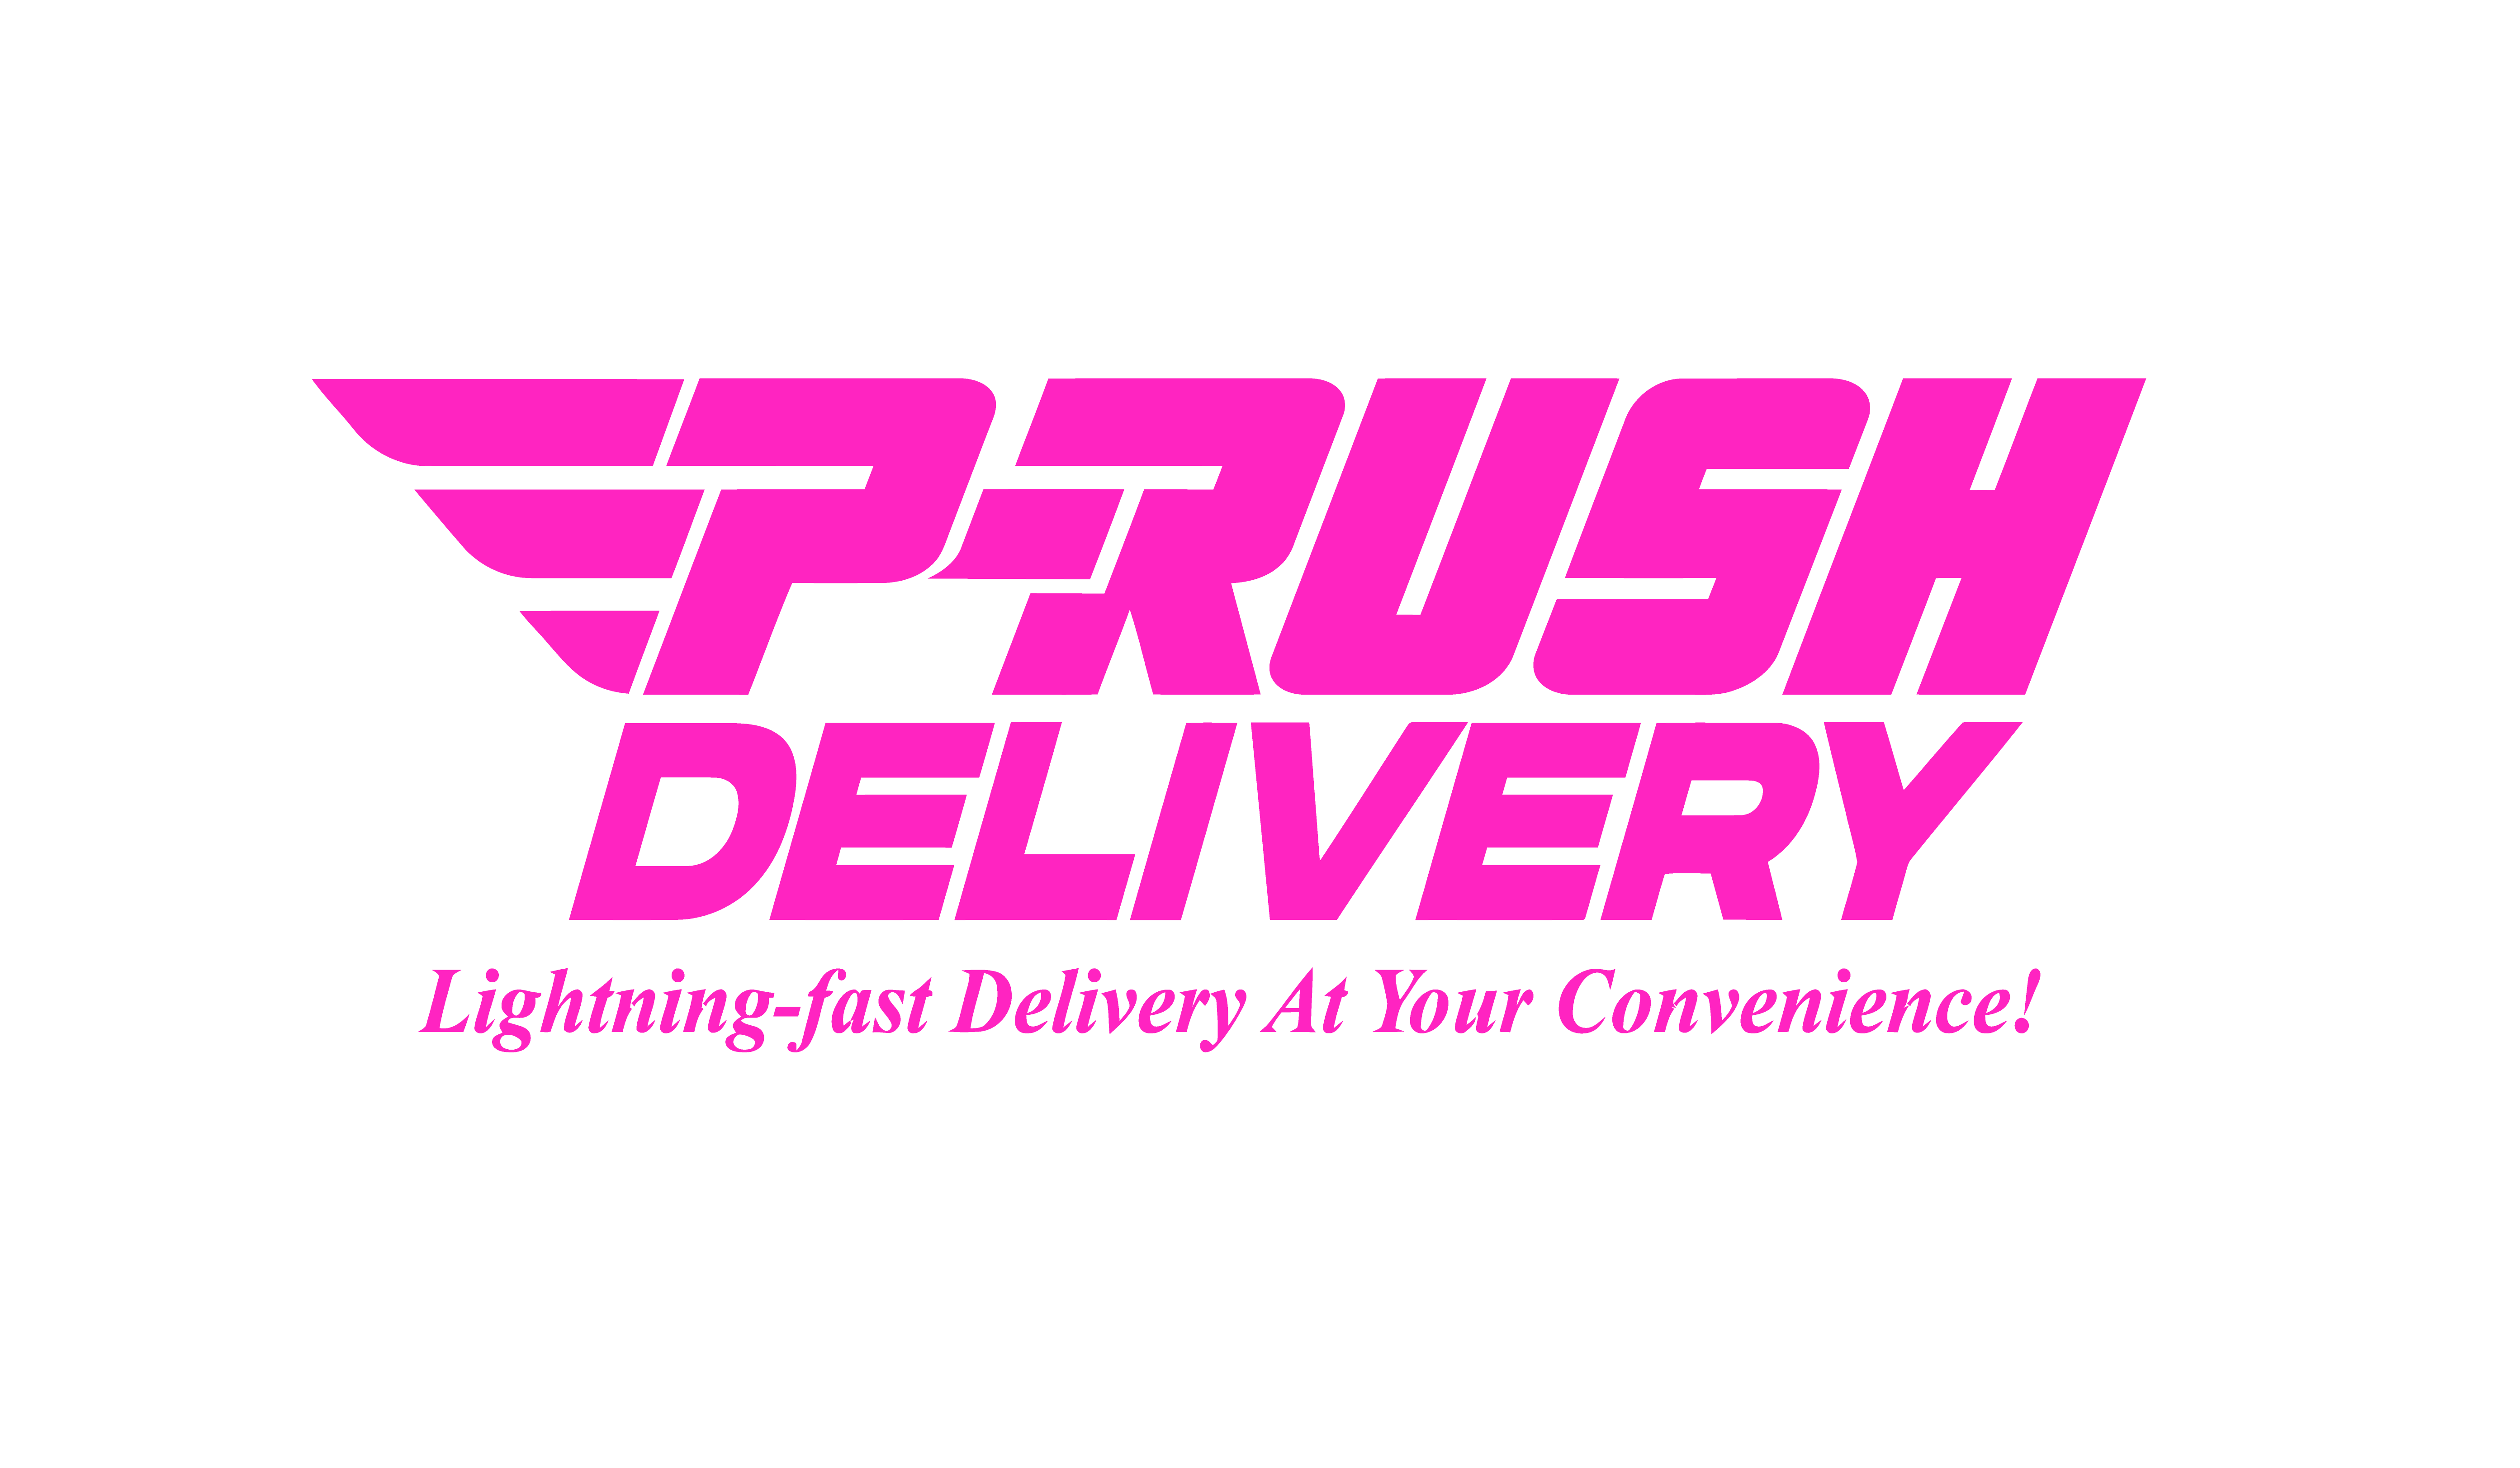 PRUSH DELIVERY 